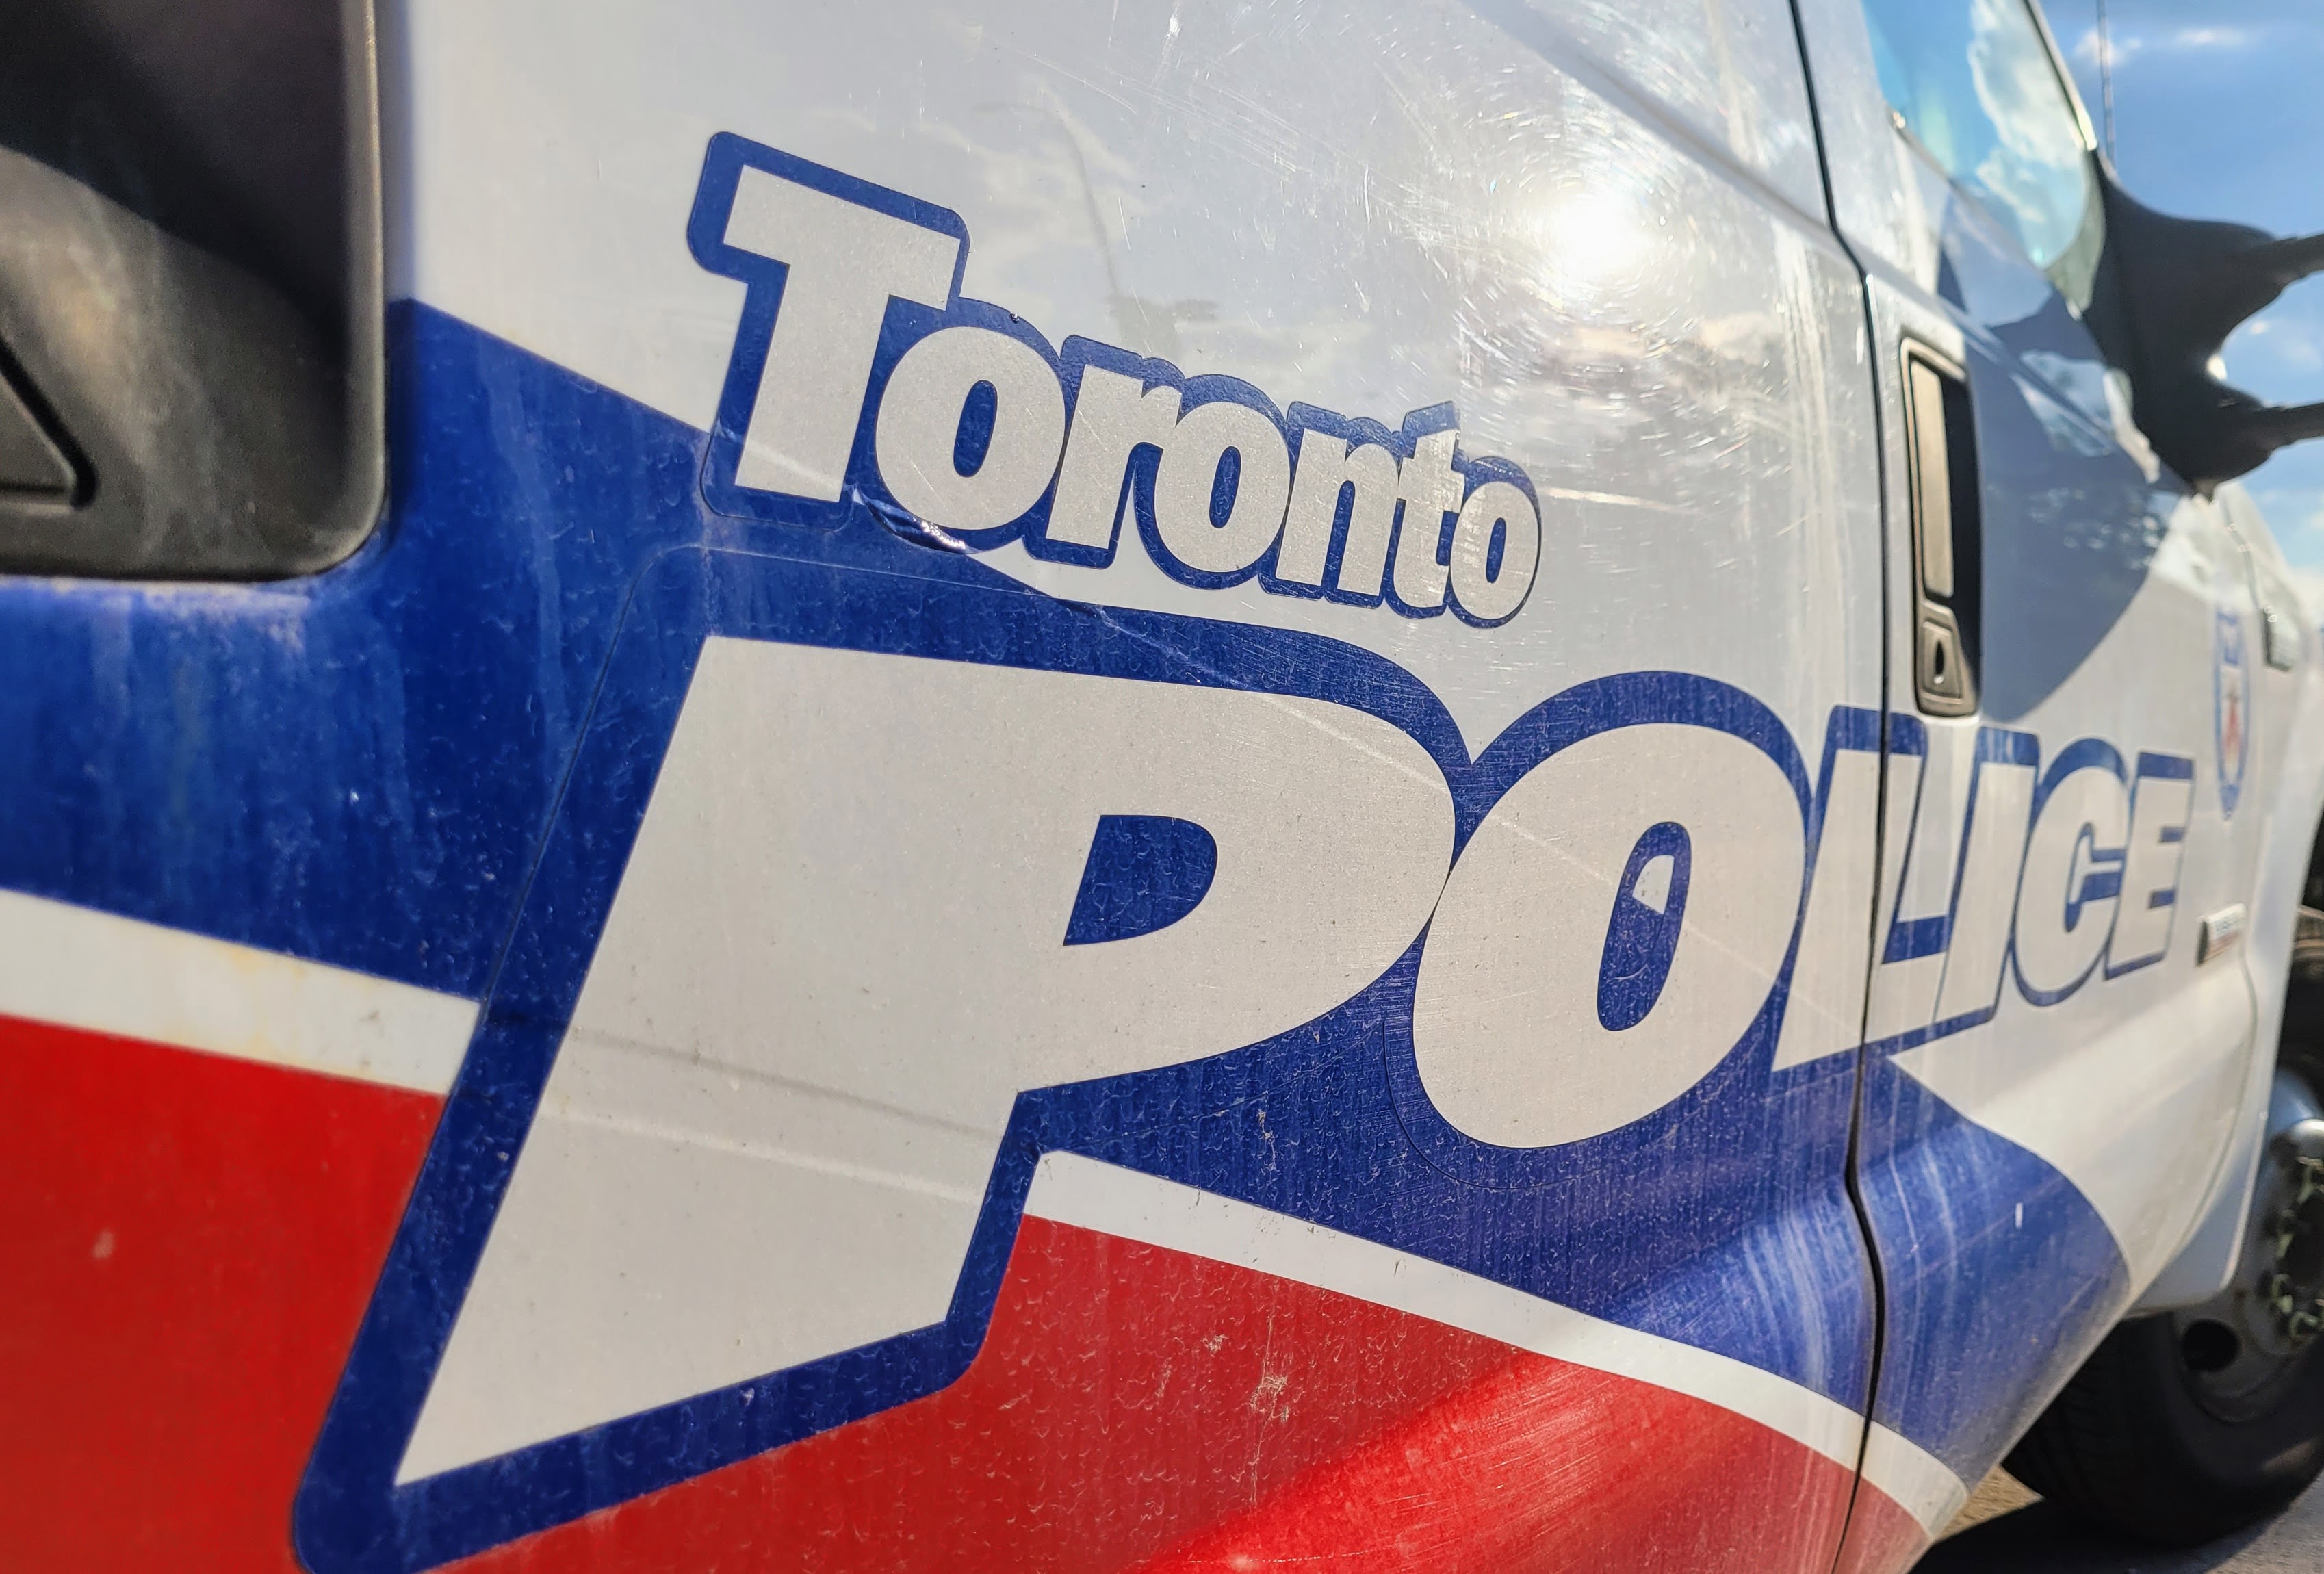 Cyclist taken to hospital with leg injury after collision with vehicle in Toronto: police